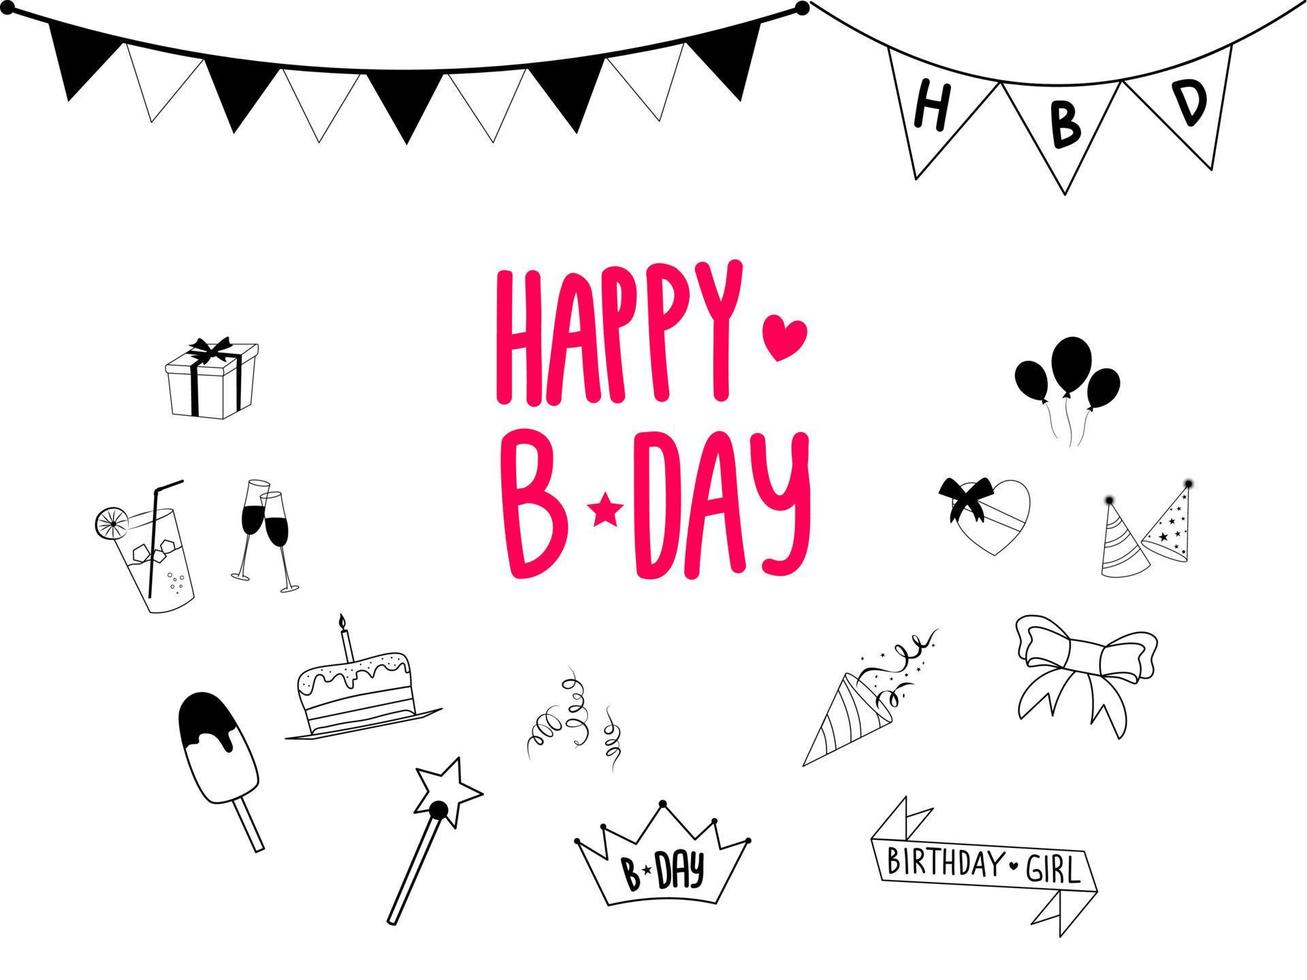 Set of Happy Birthday doodles. Sketch of party decoration, gift box, cake, party hats. Hand drawn vector illustration isolated on white background.